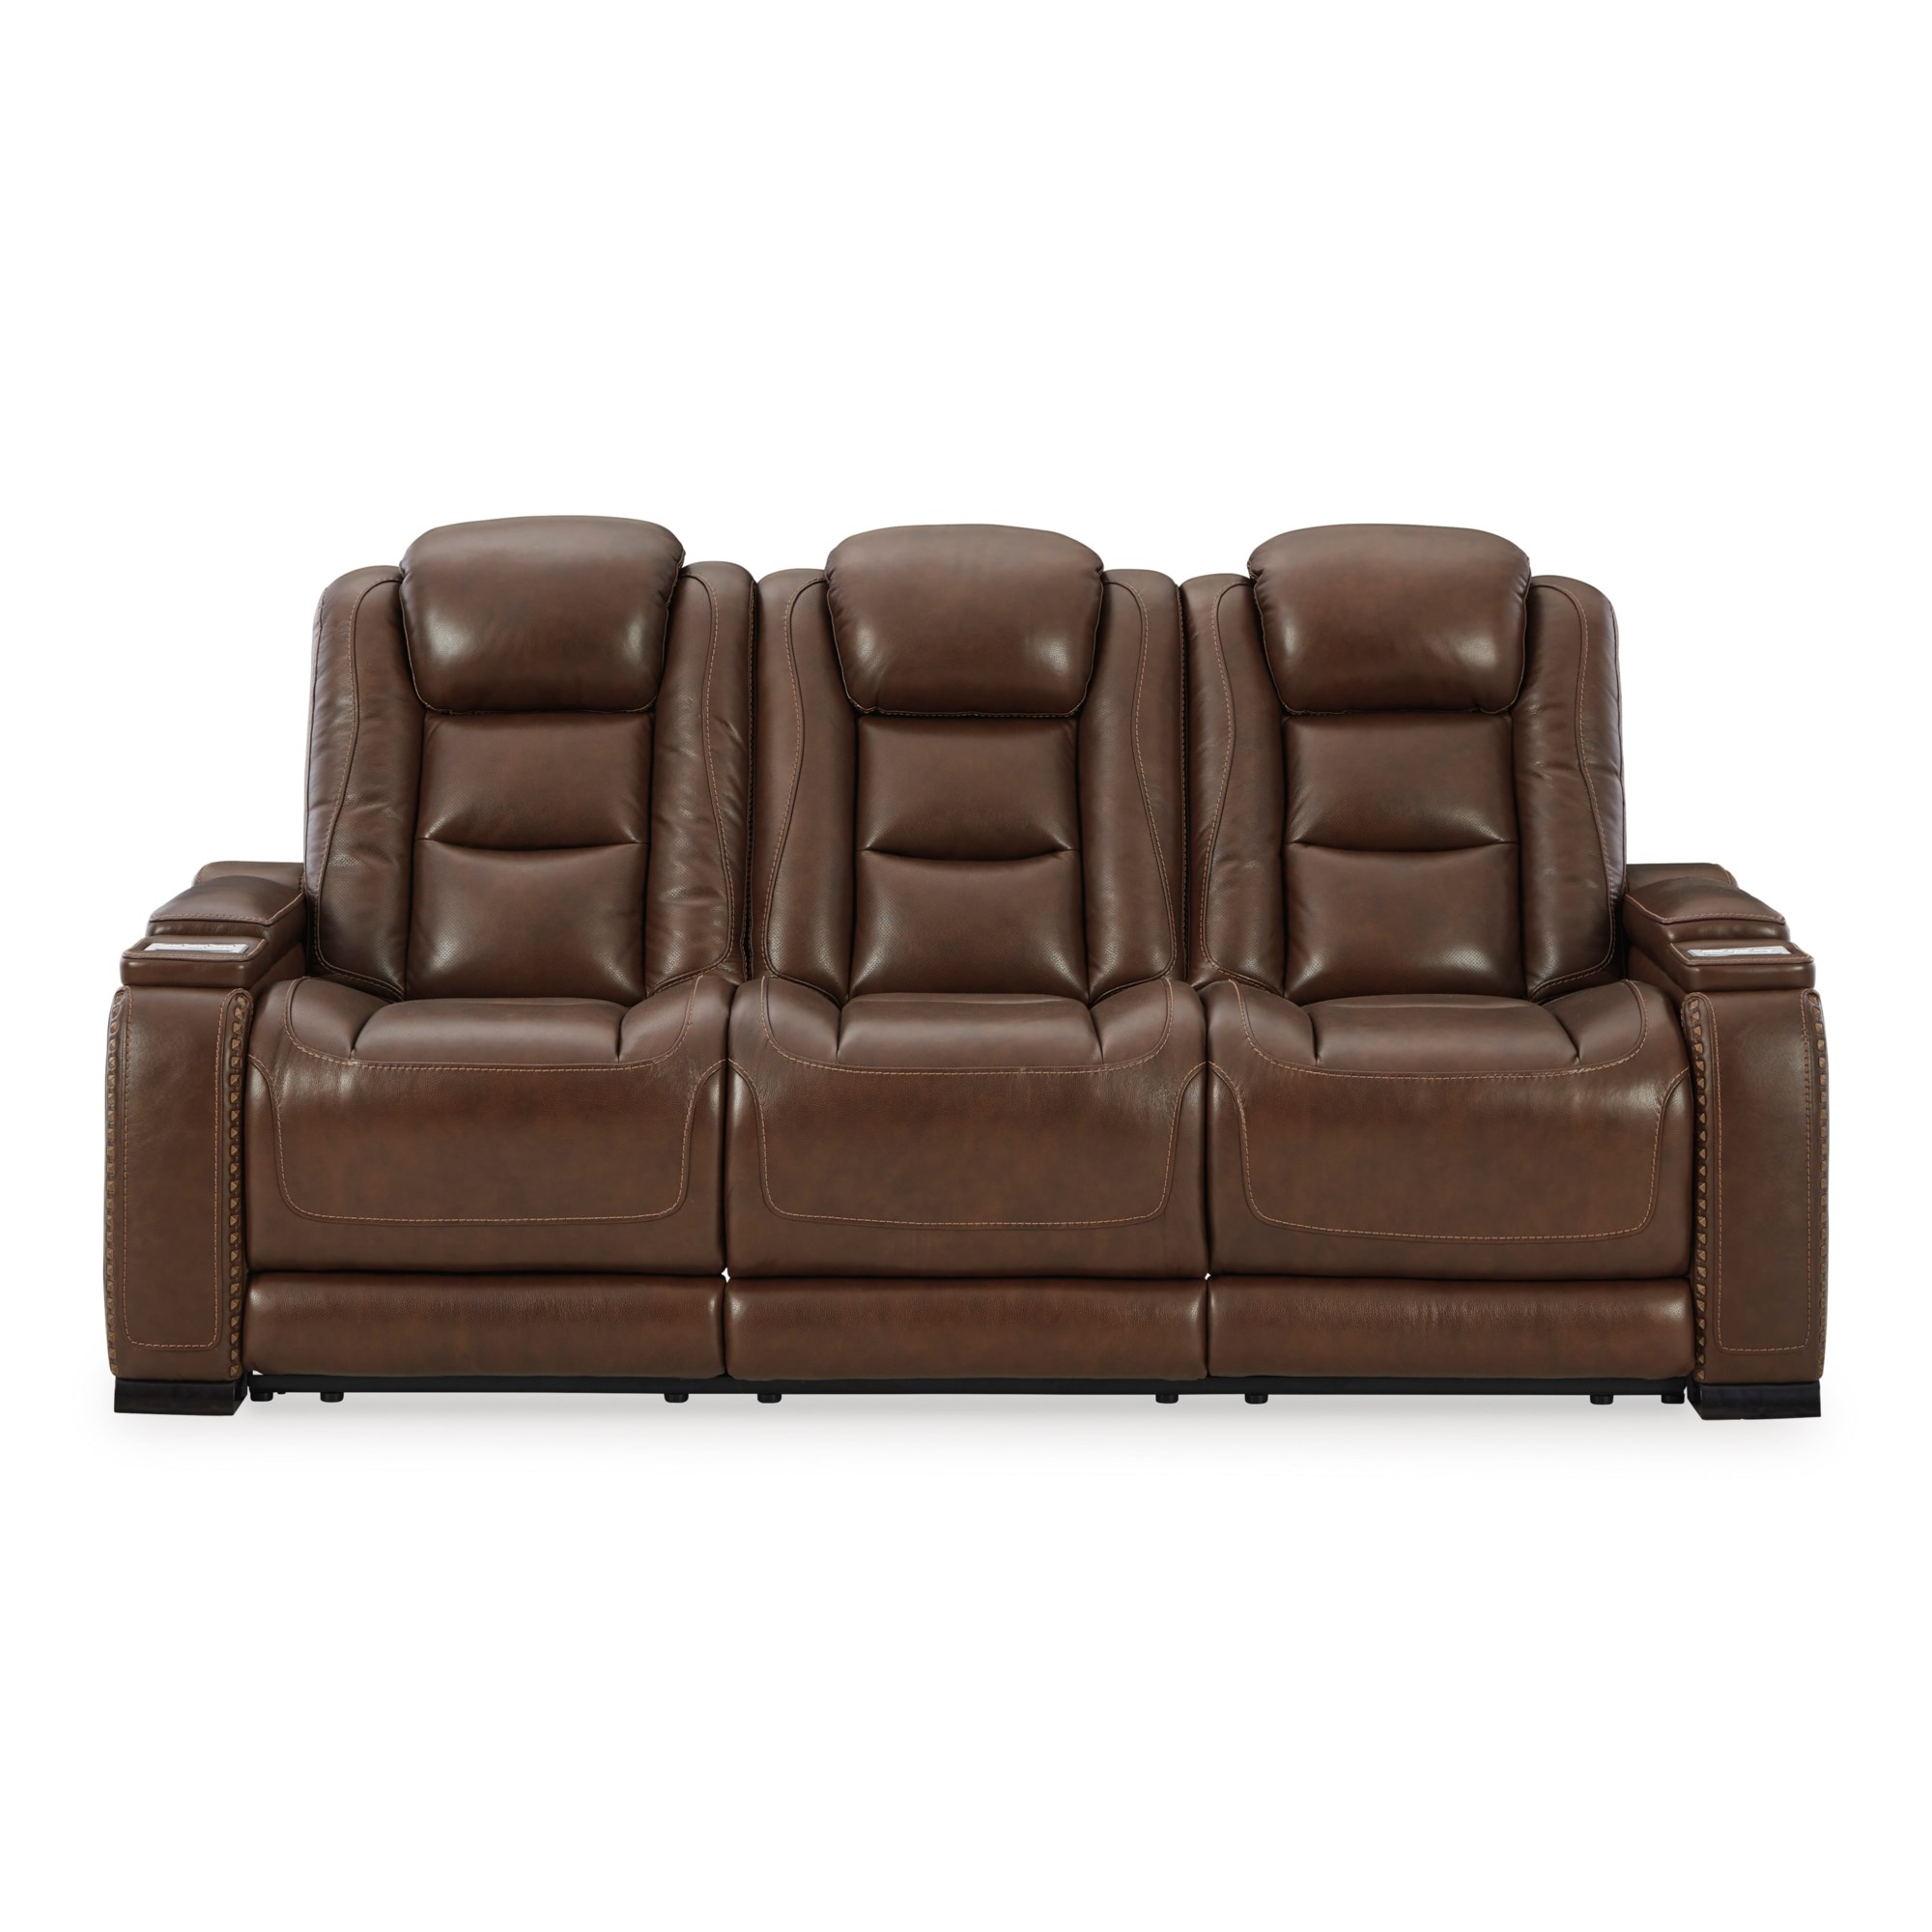 Signature Design by Ashley The Man-Den U8530615 Contemporary Power  Reclining Sofa with Adjustable Headrest and Lumbar Support, Wayside  Furniture & Mattress